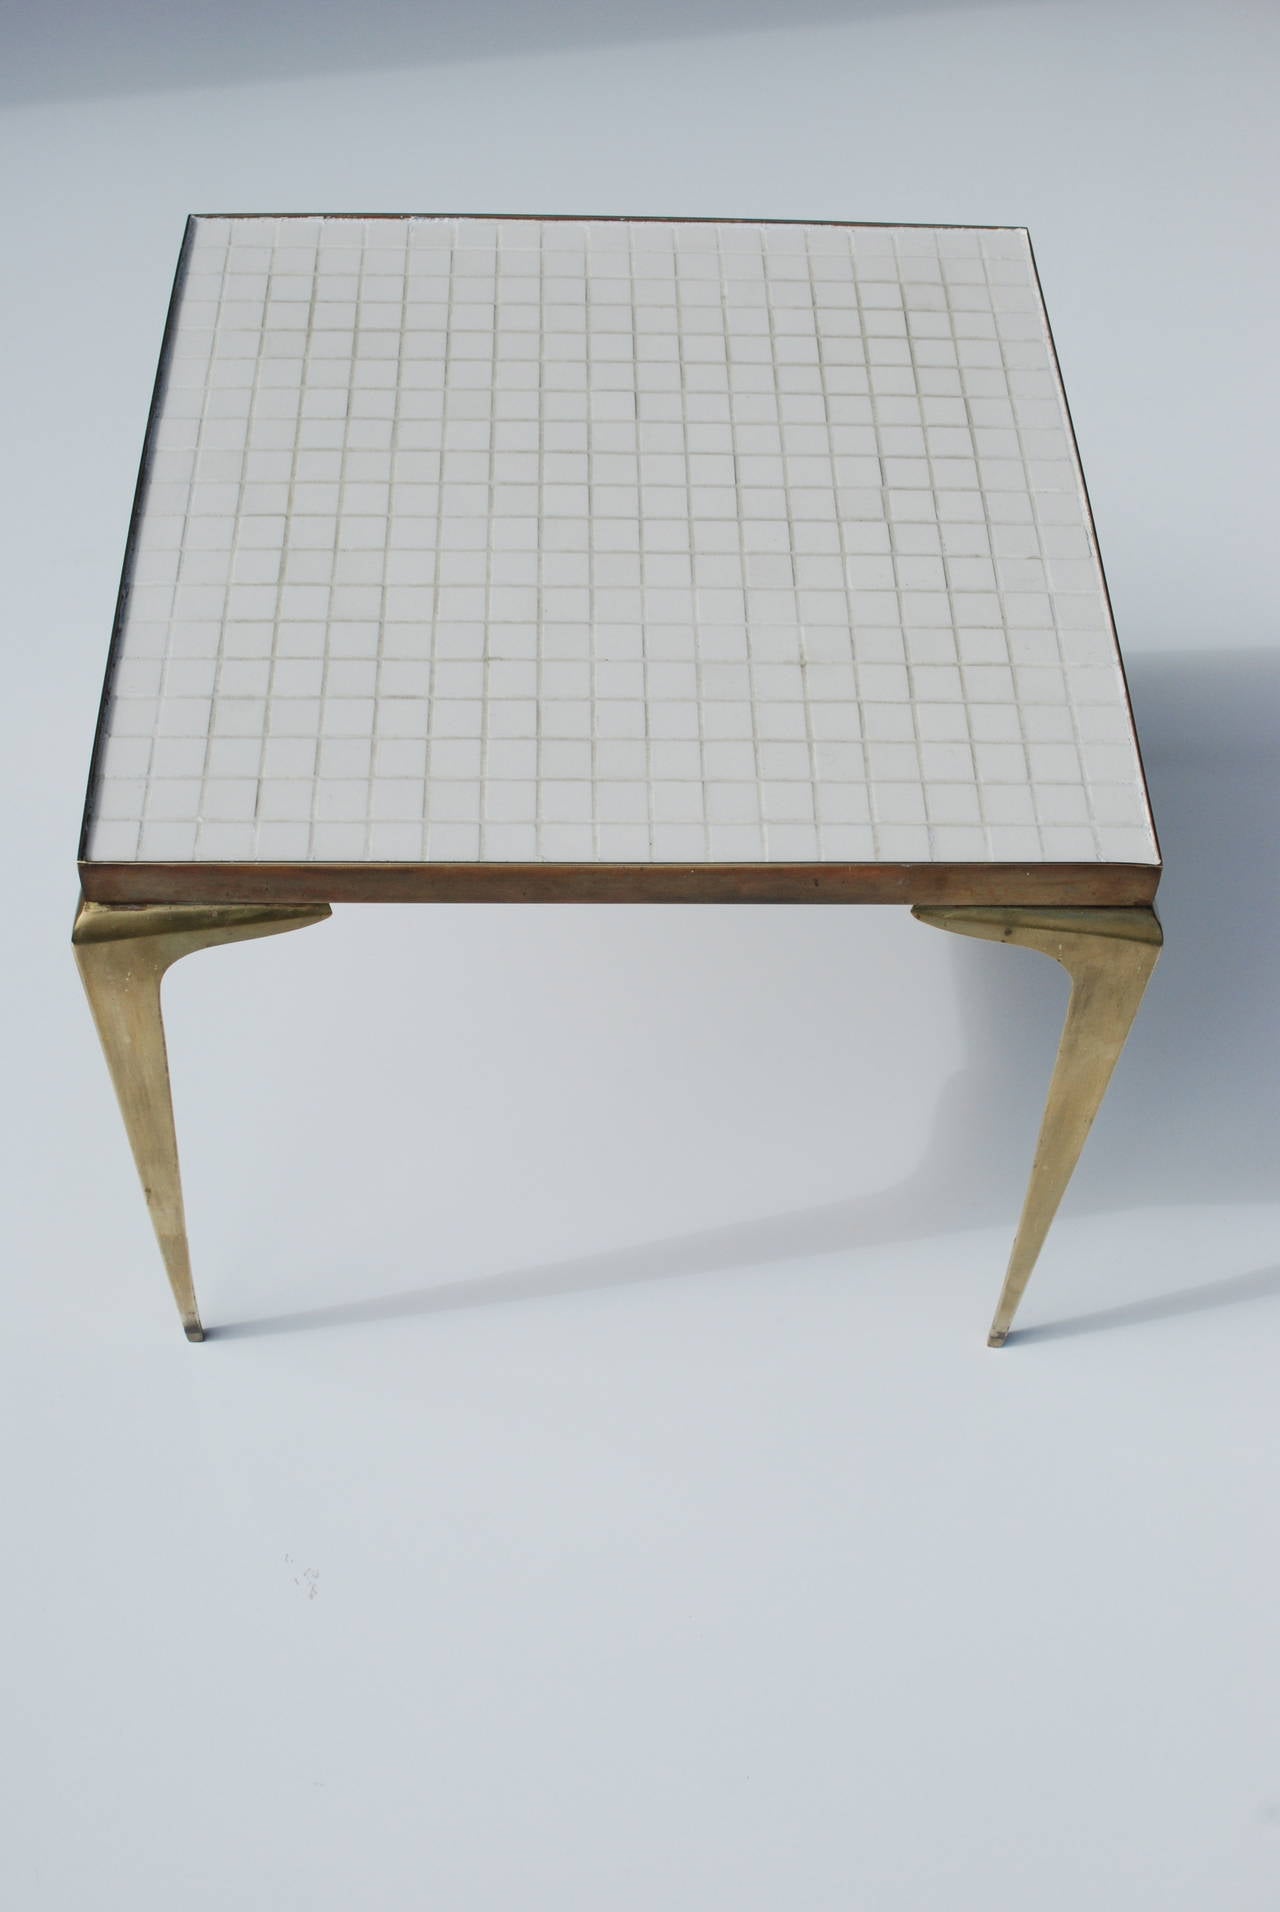 This is a beautiful table with pointed brass legs that are stamped made in Japan. The table is made of white glass mosaic tiles. 
We have a coordinating coffee table in a separate posting.